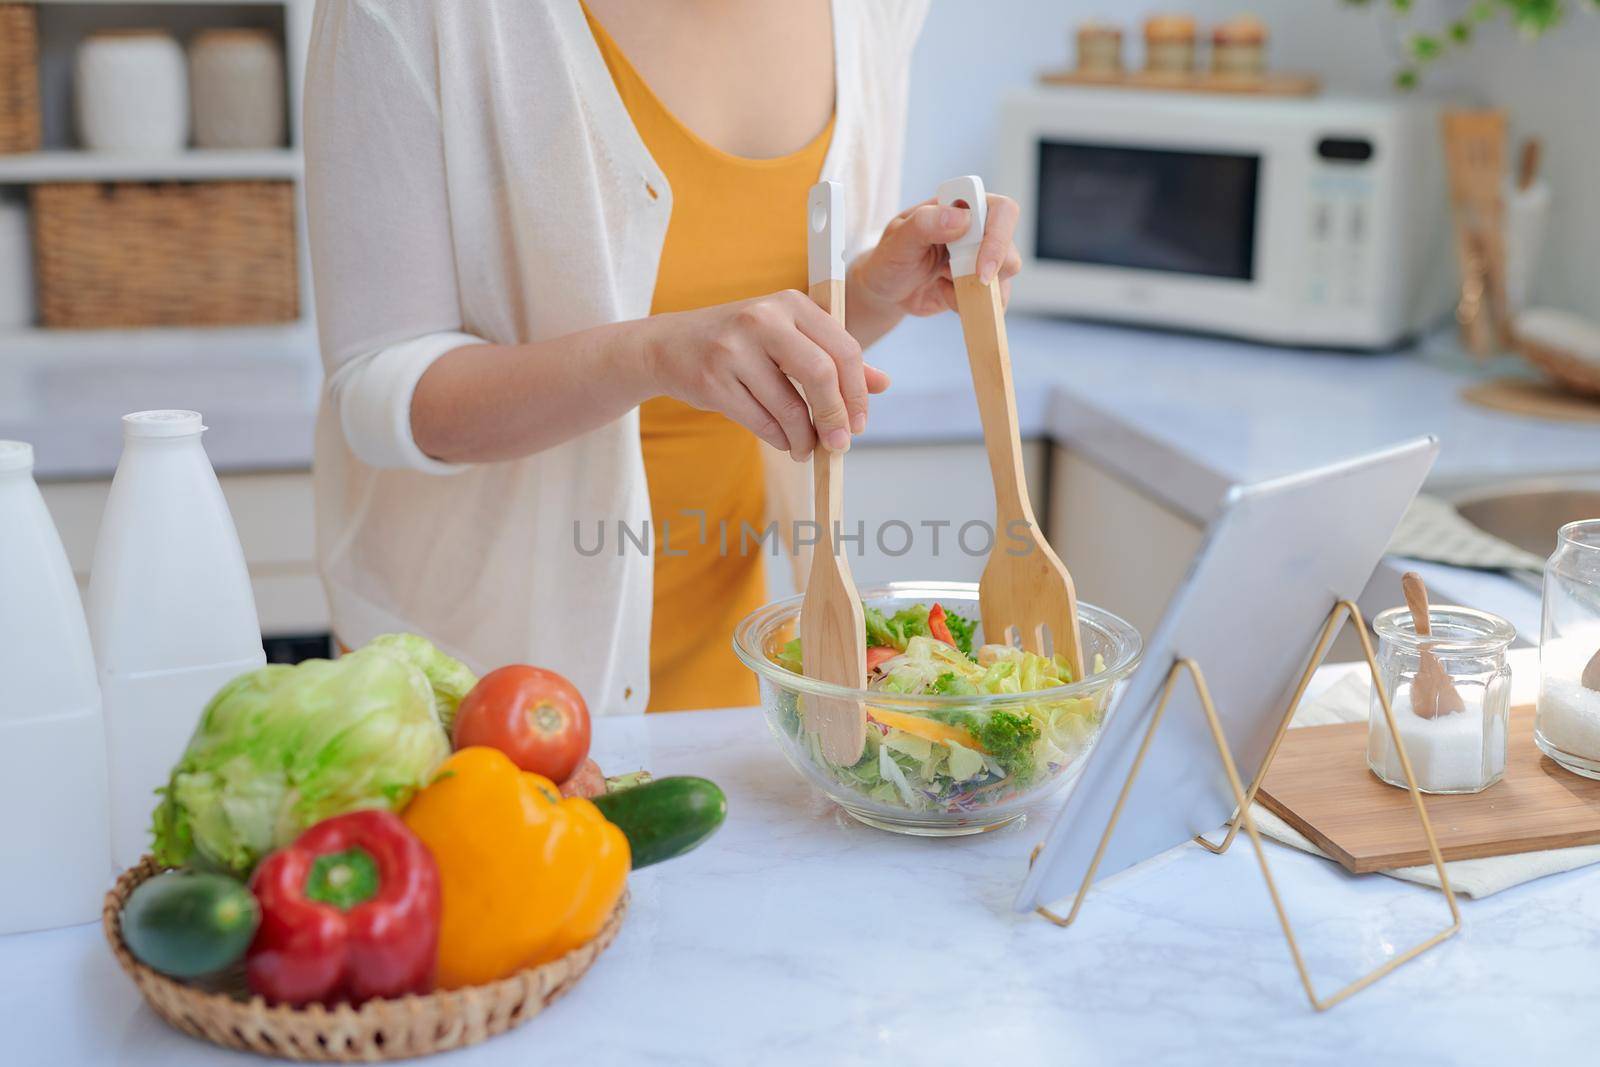 Beautiful smiling woman eating vegetables while making a salad from a recipe on the tablet computer in a kitchen by makidotvn